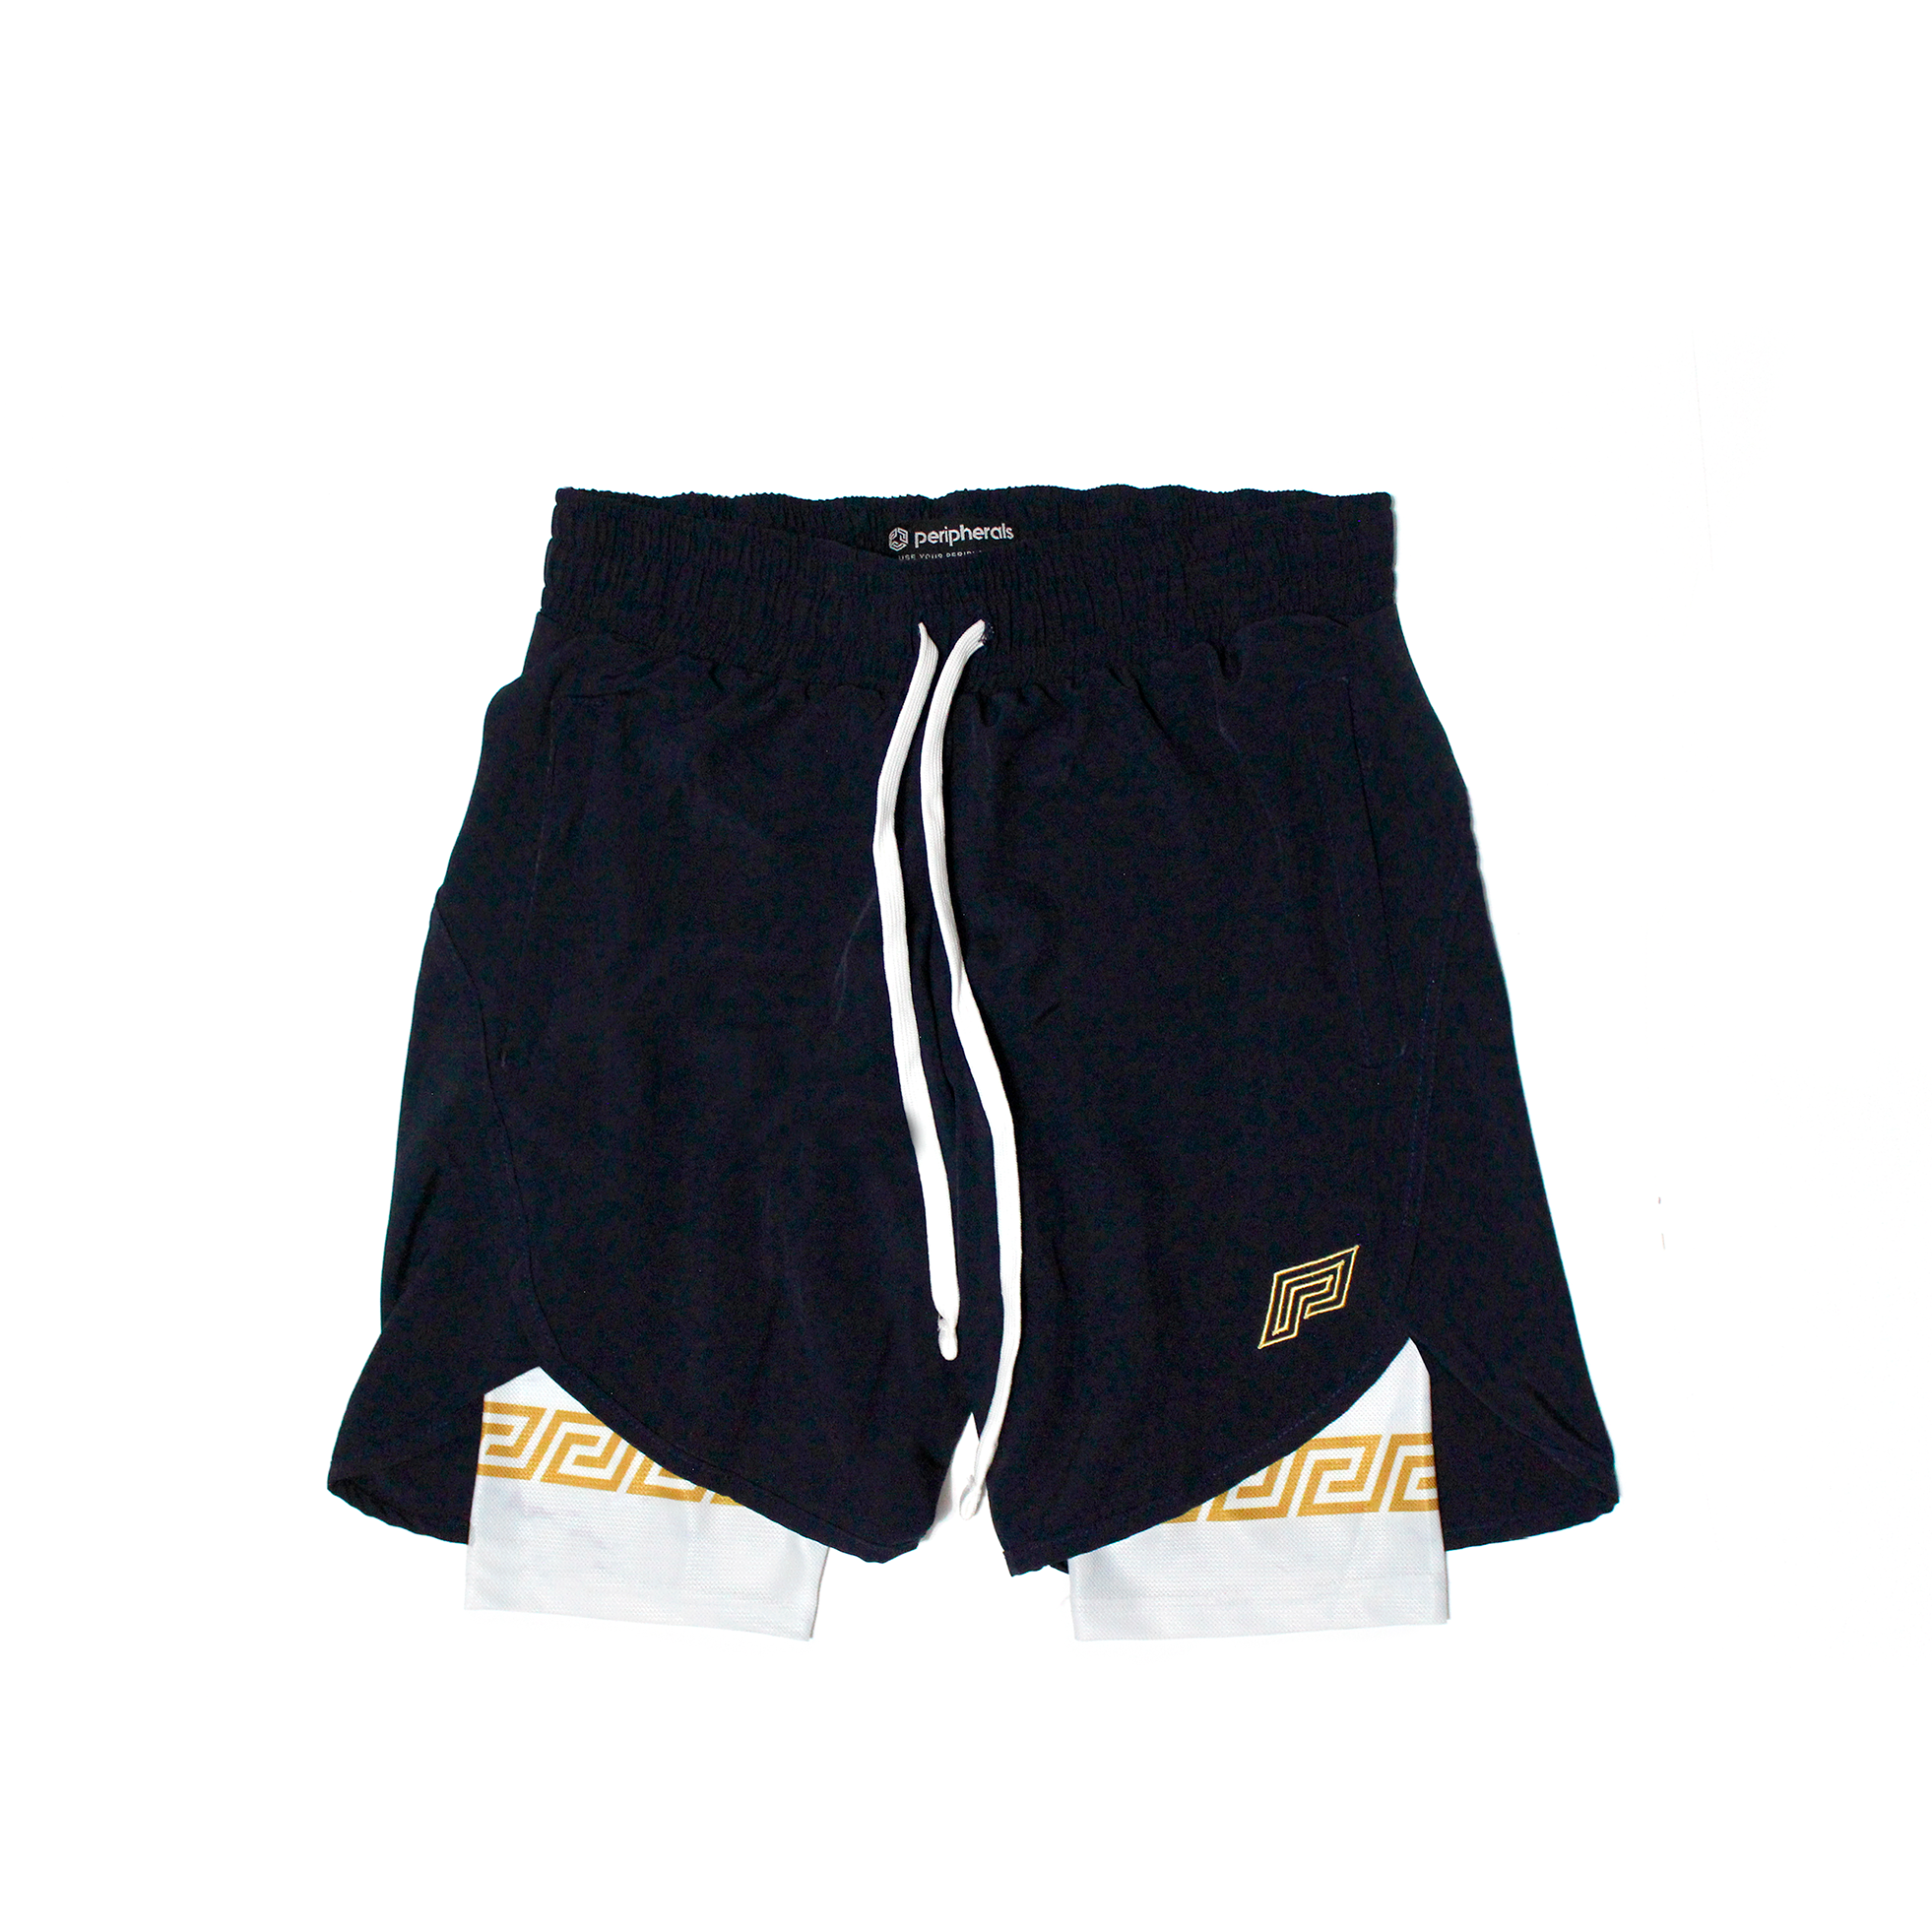 Spartan Training Shorts w Liner - Navy / Marble